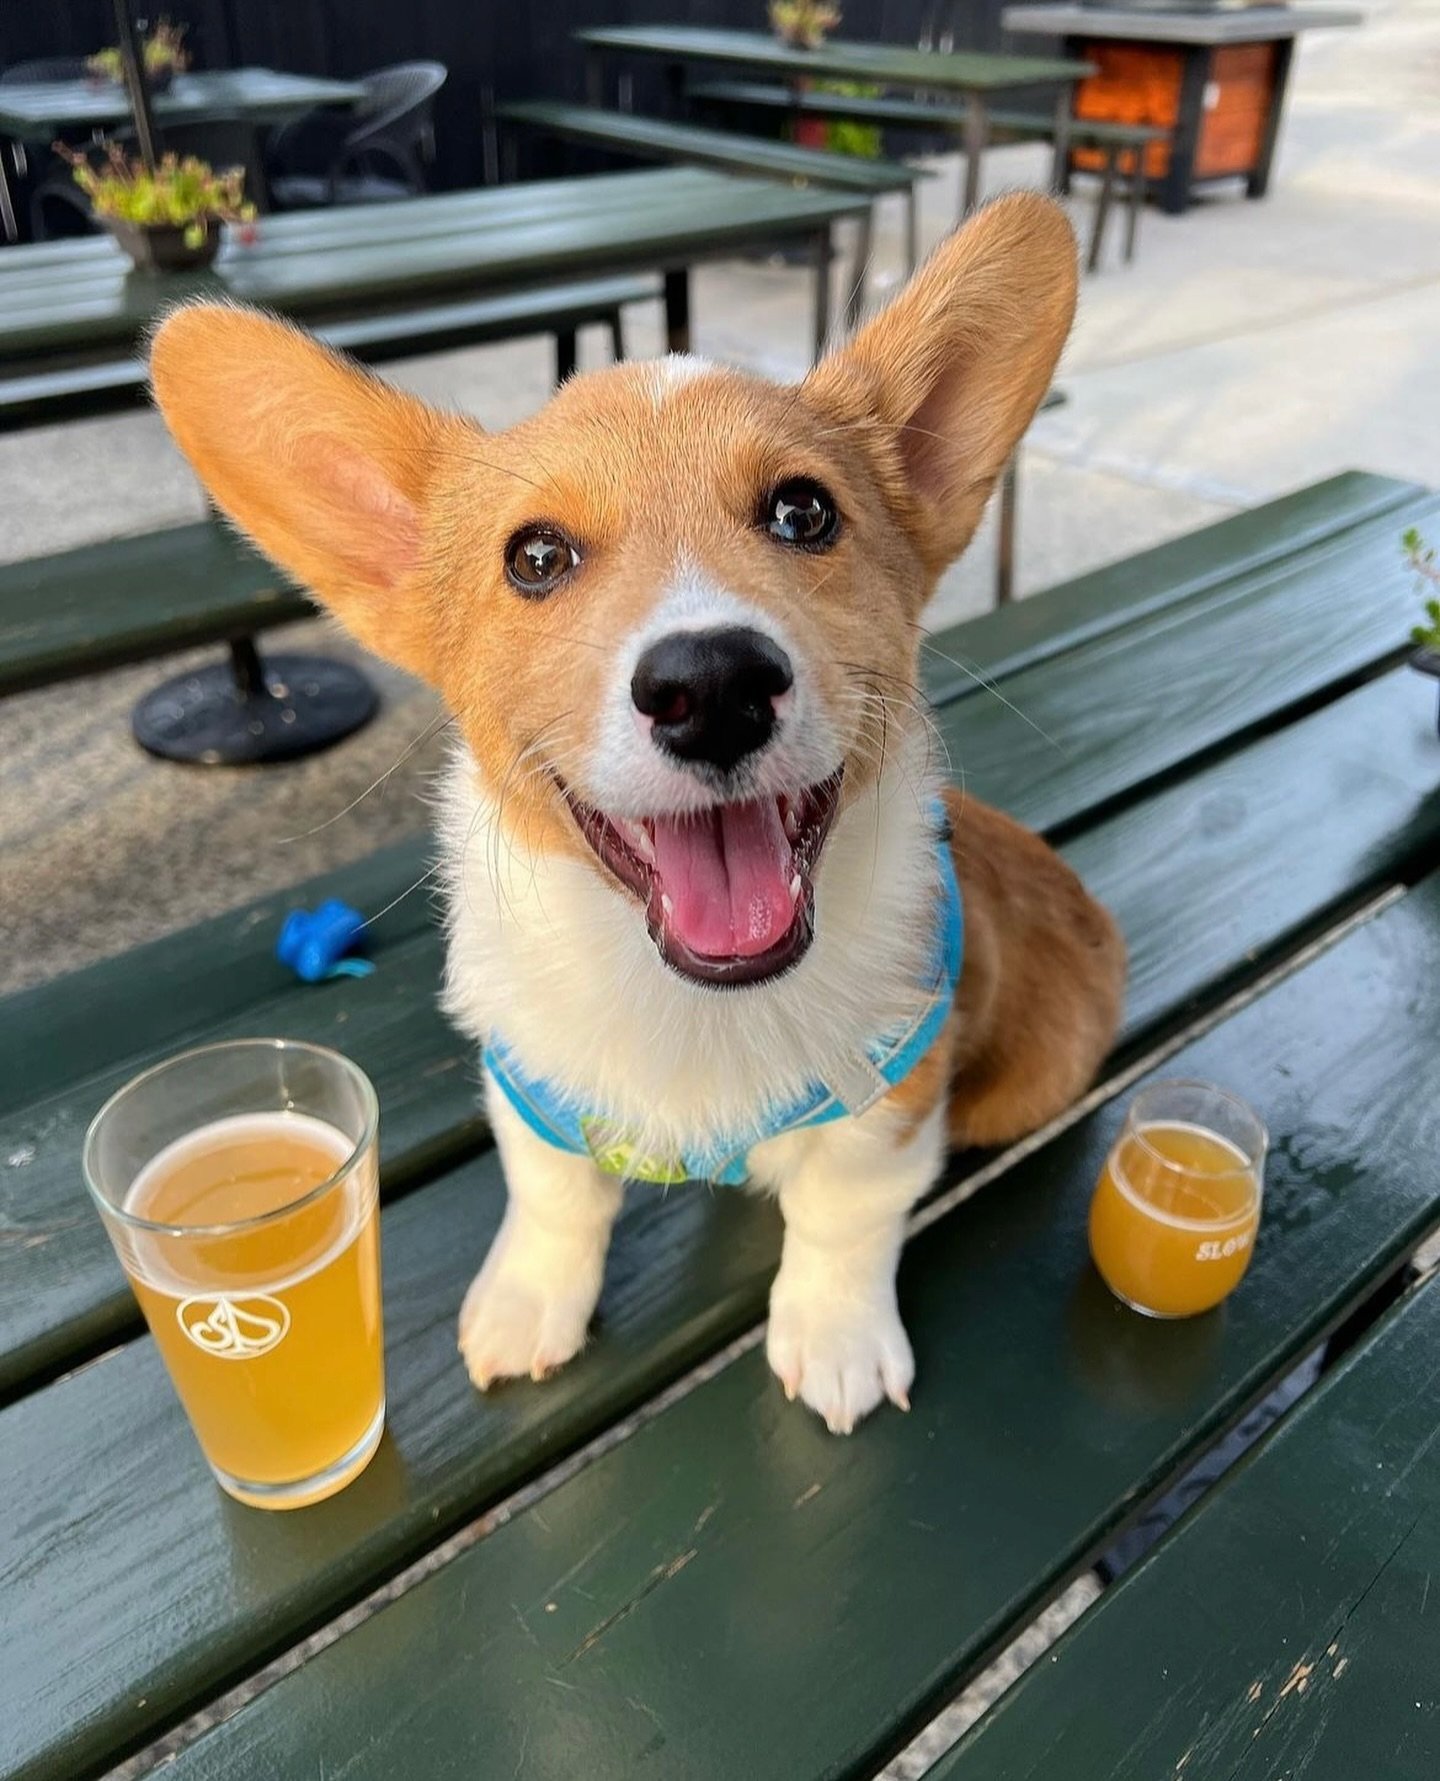 😁 All smiles for patio Saturdays! We&rsquo;ve got ice cold pup cups &amp; ice cold beers. Come on! 

🍺 Taproom &amp; Patio 12-11pm
🌀 @twistedeatstruck 12-9pm
🎶 @ryanjaybailey LIVE 6-9pm
🥂 Mimosas, wine, cider, pop-seccos w/ @friospops 
🥤 House 